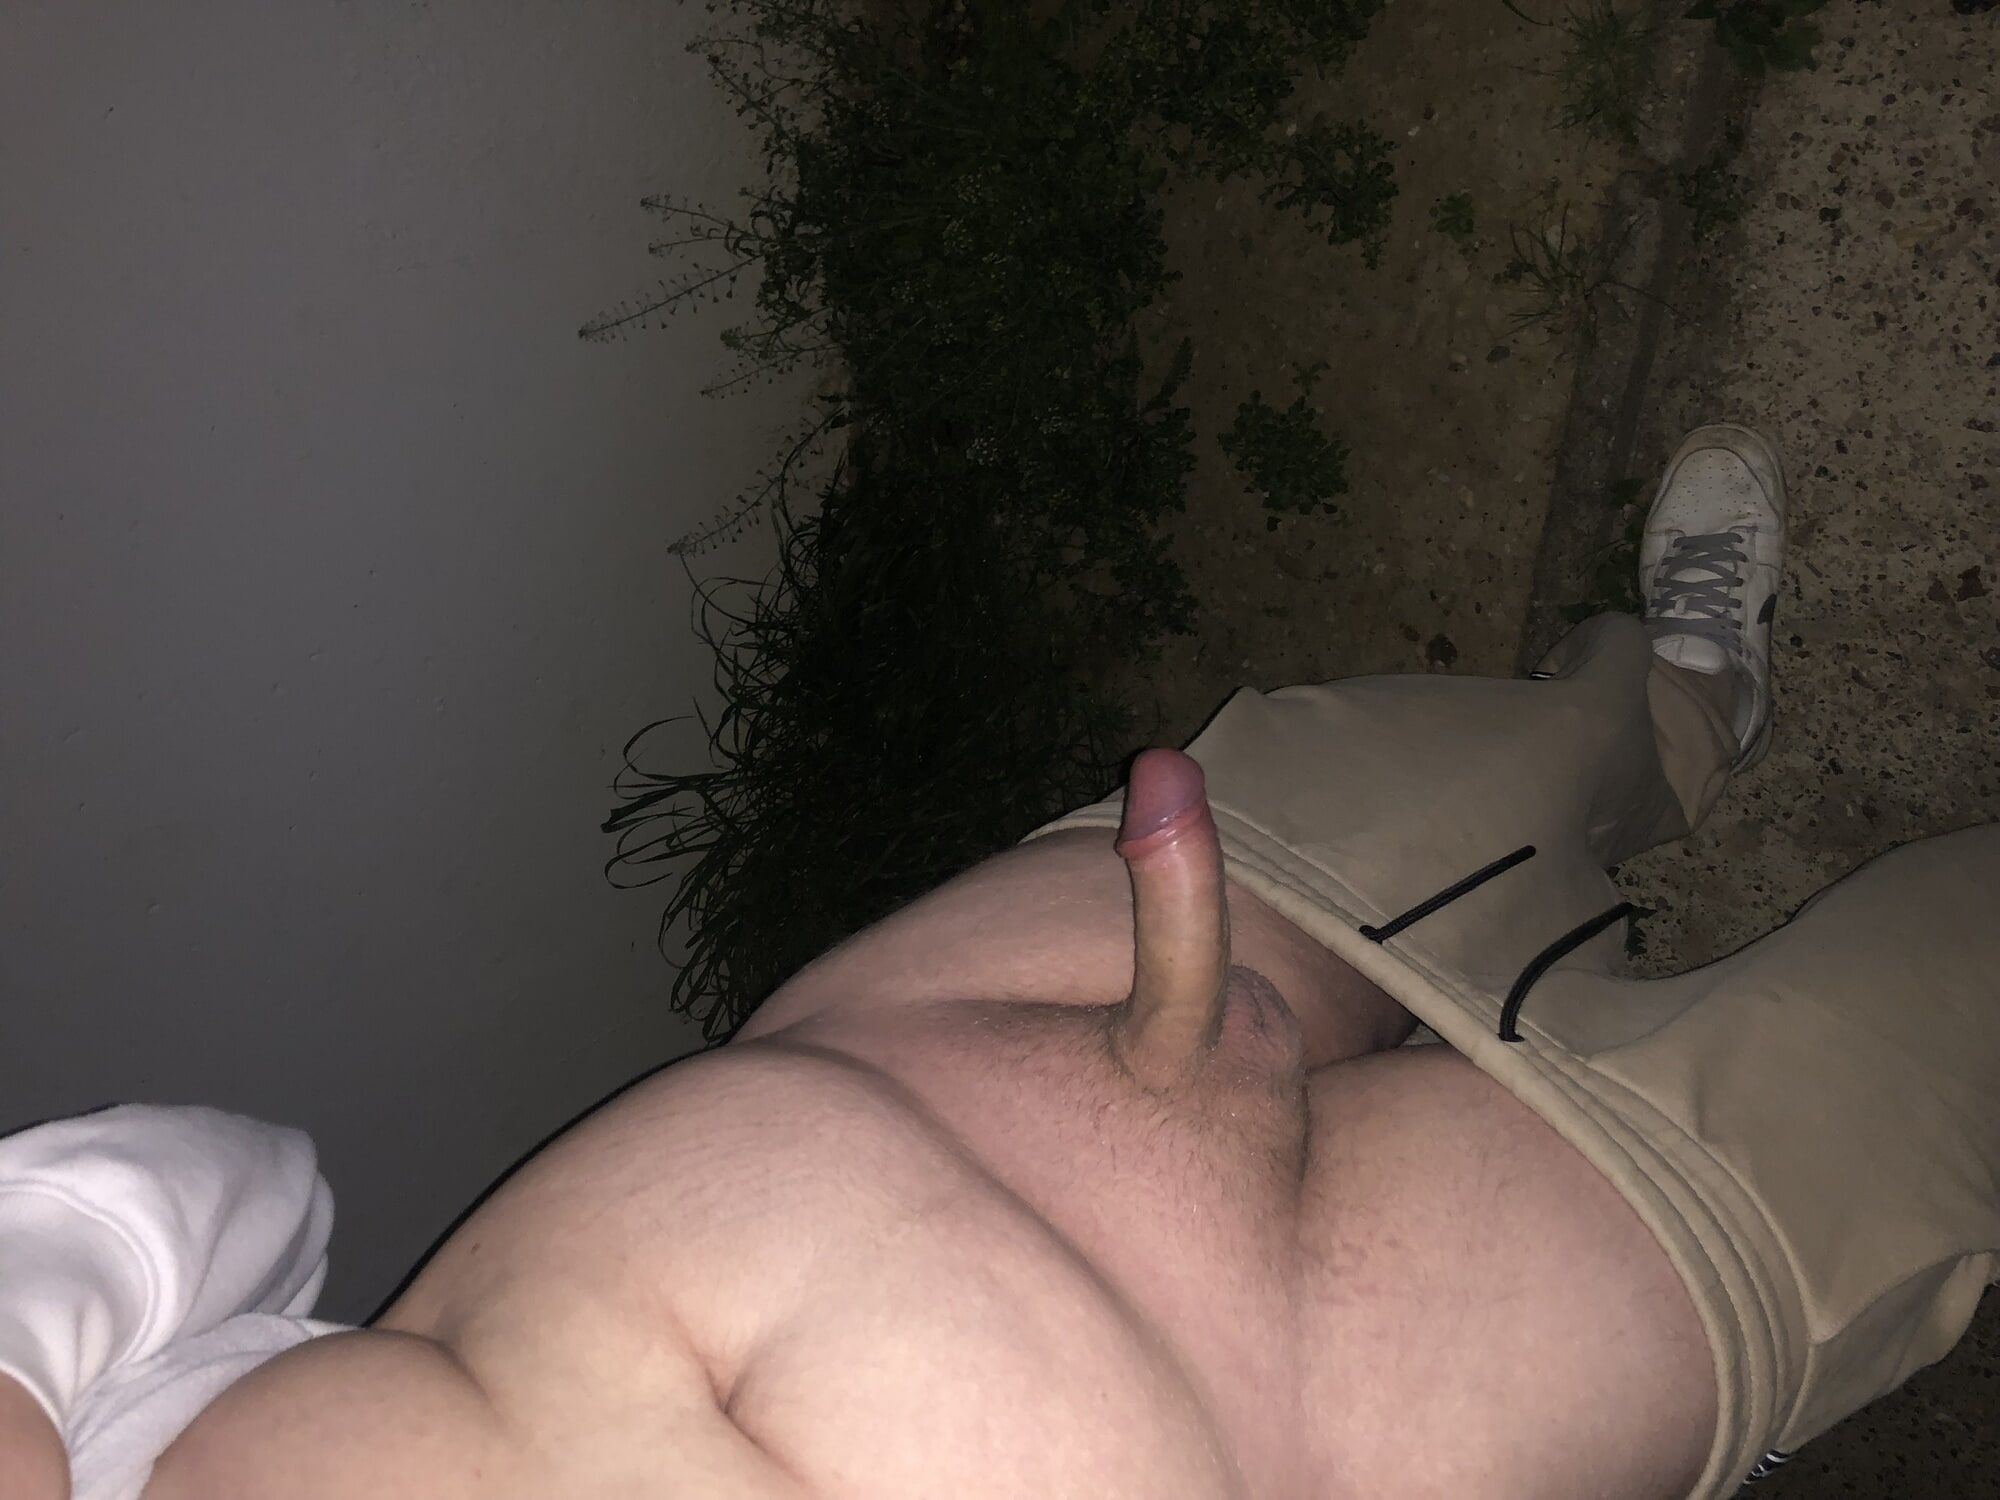 pulling my cock out in puplic